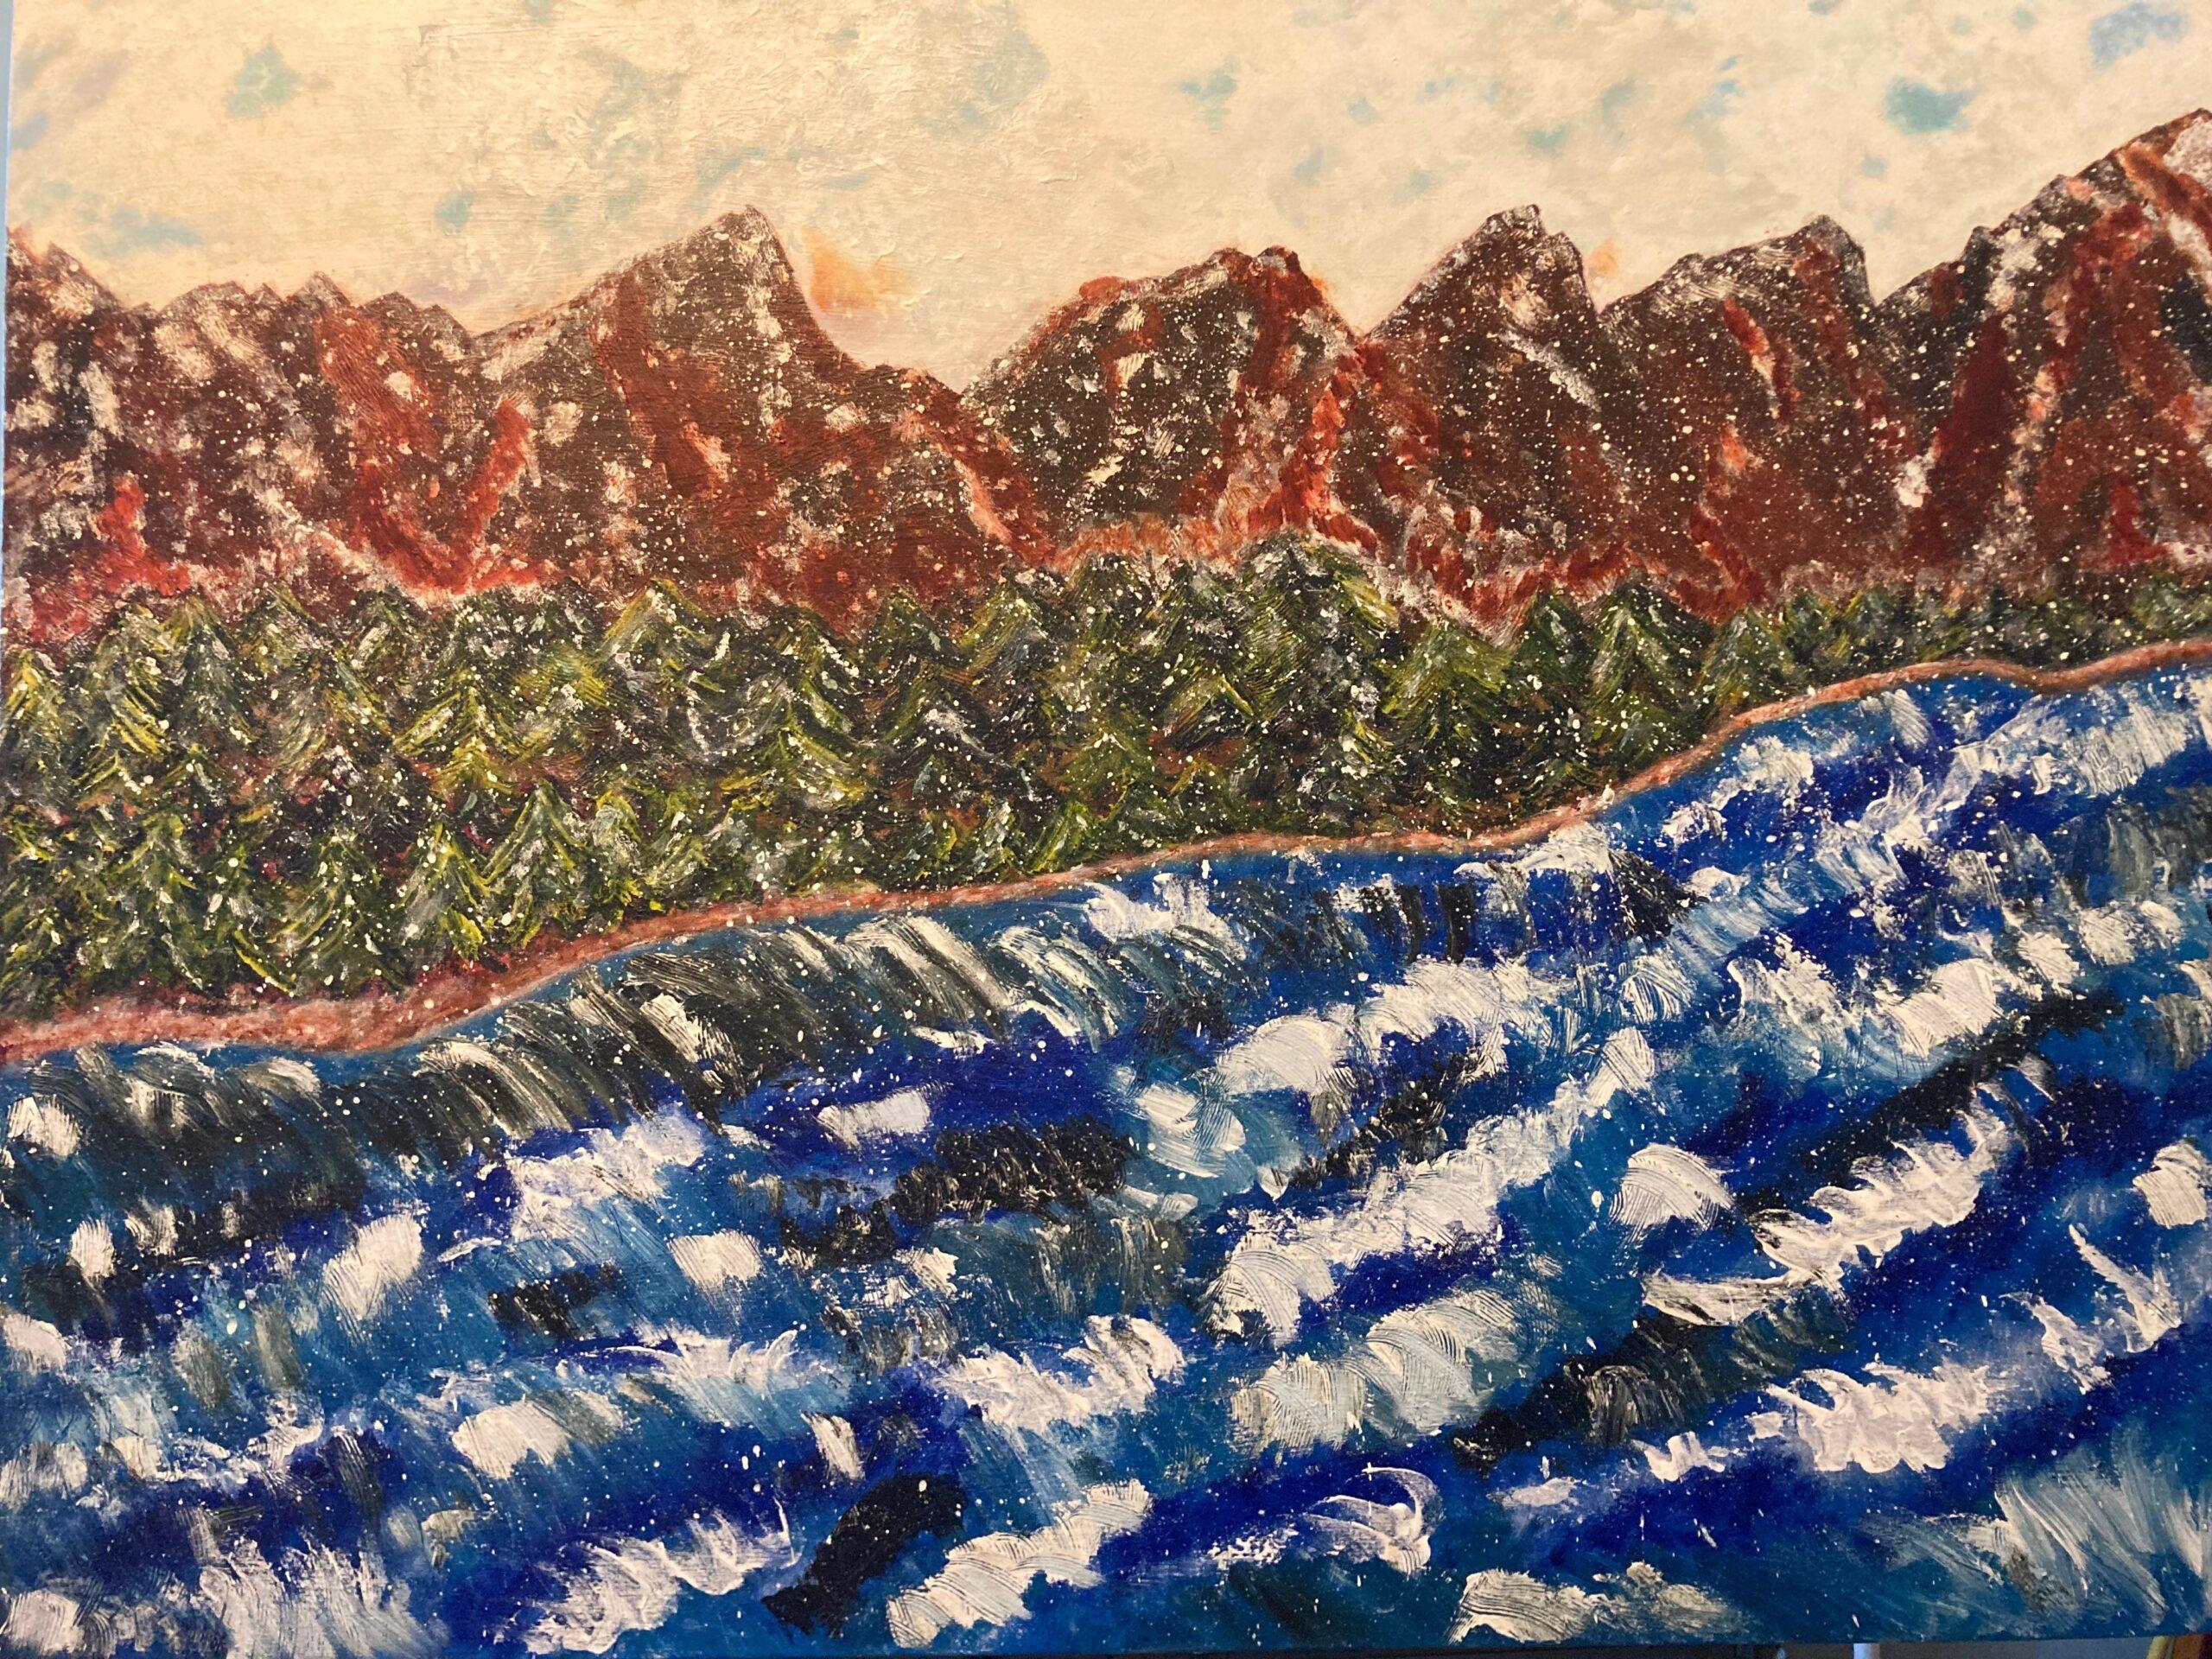 Mountain Water by Janie Dugan - Painting by Unknown